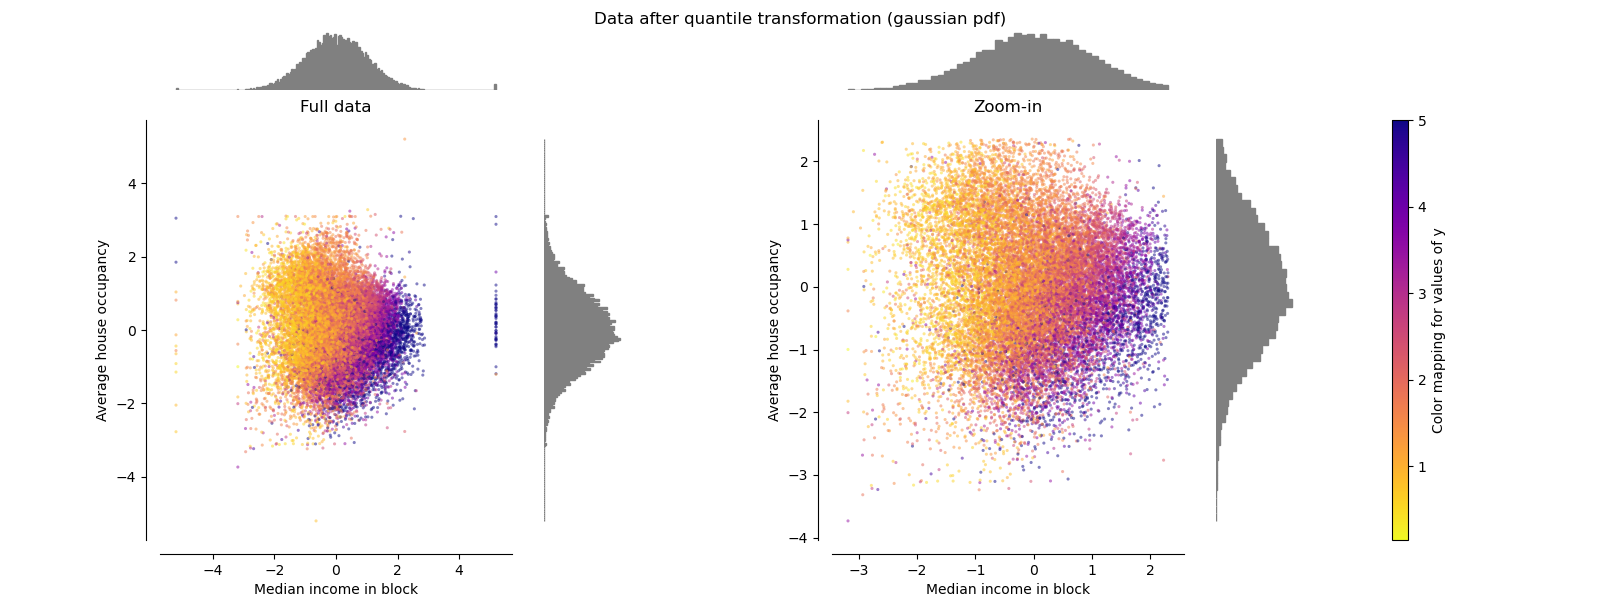 Data after quantile transformation (gaussian pdf), Full data, Zoom-in